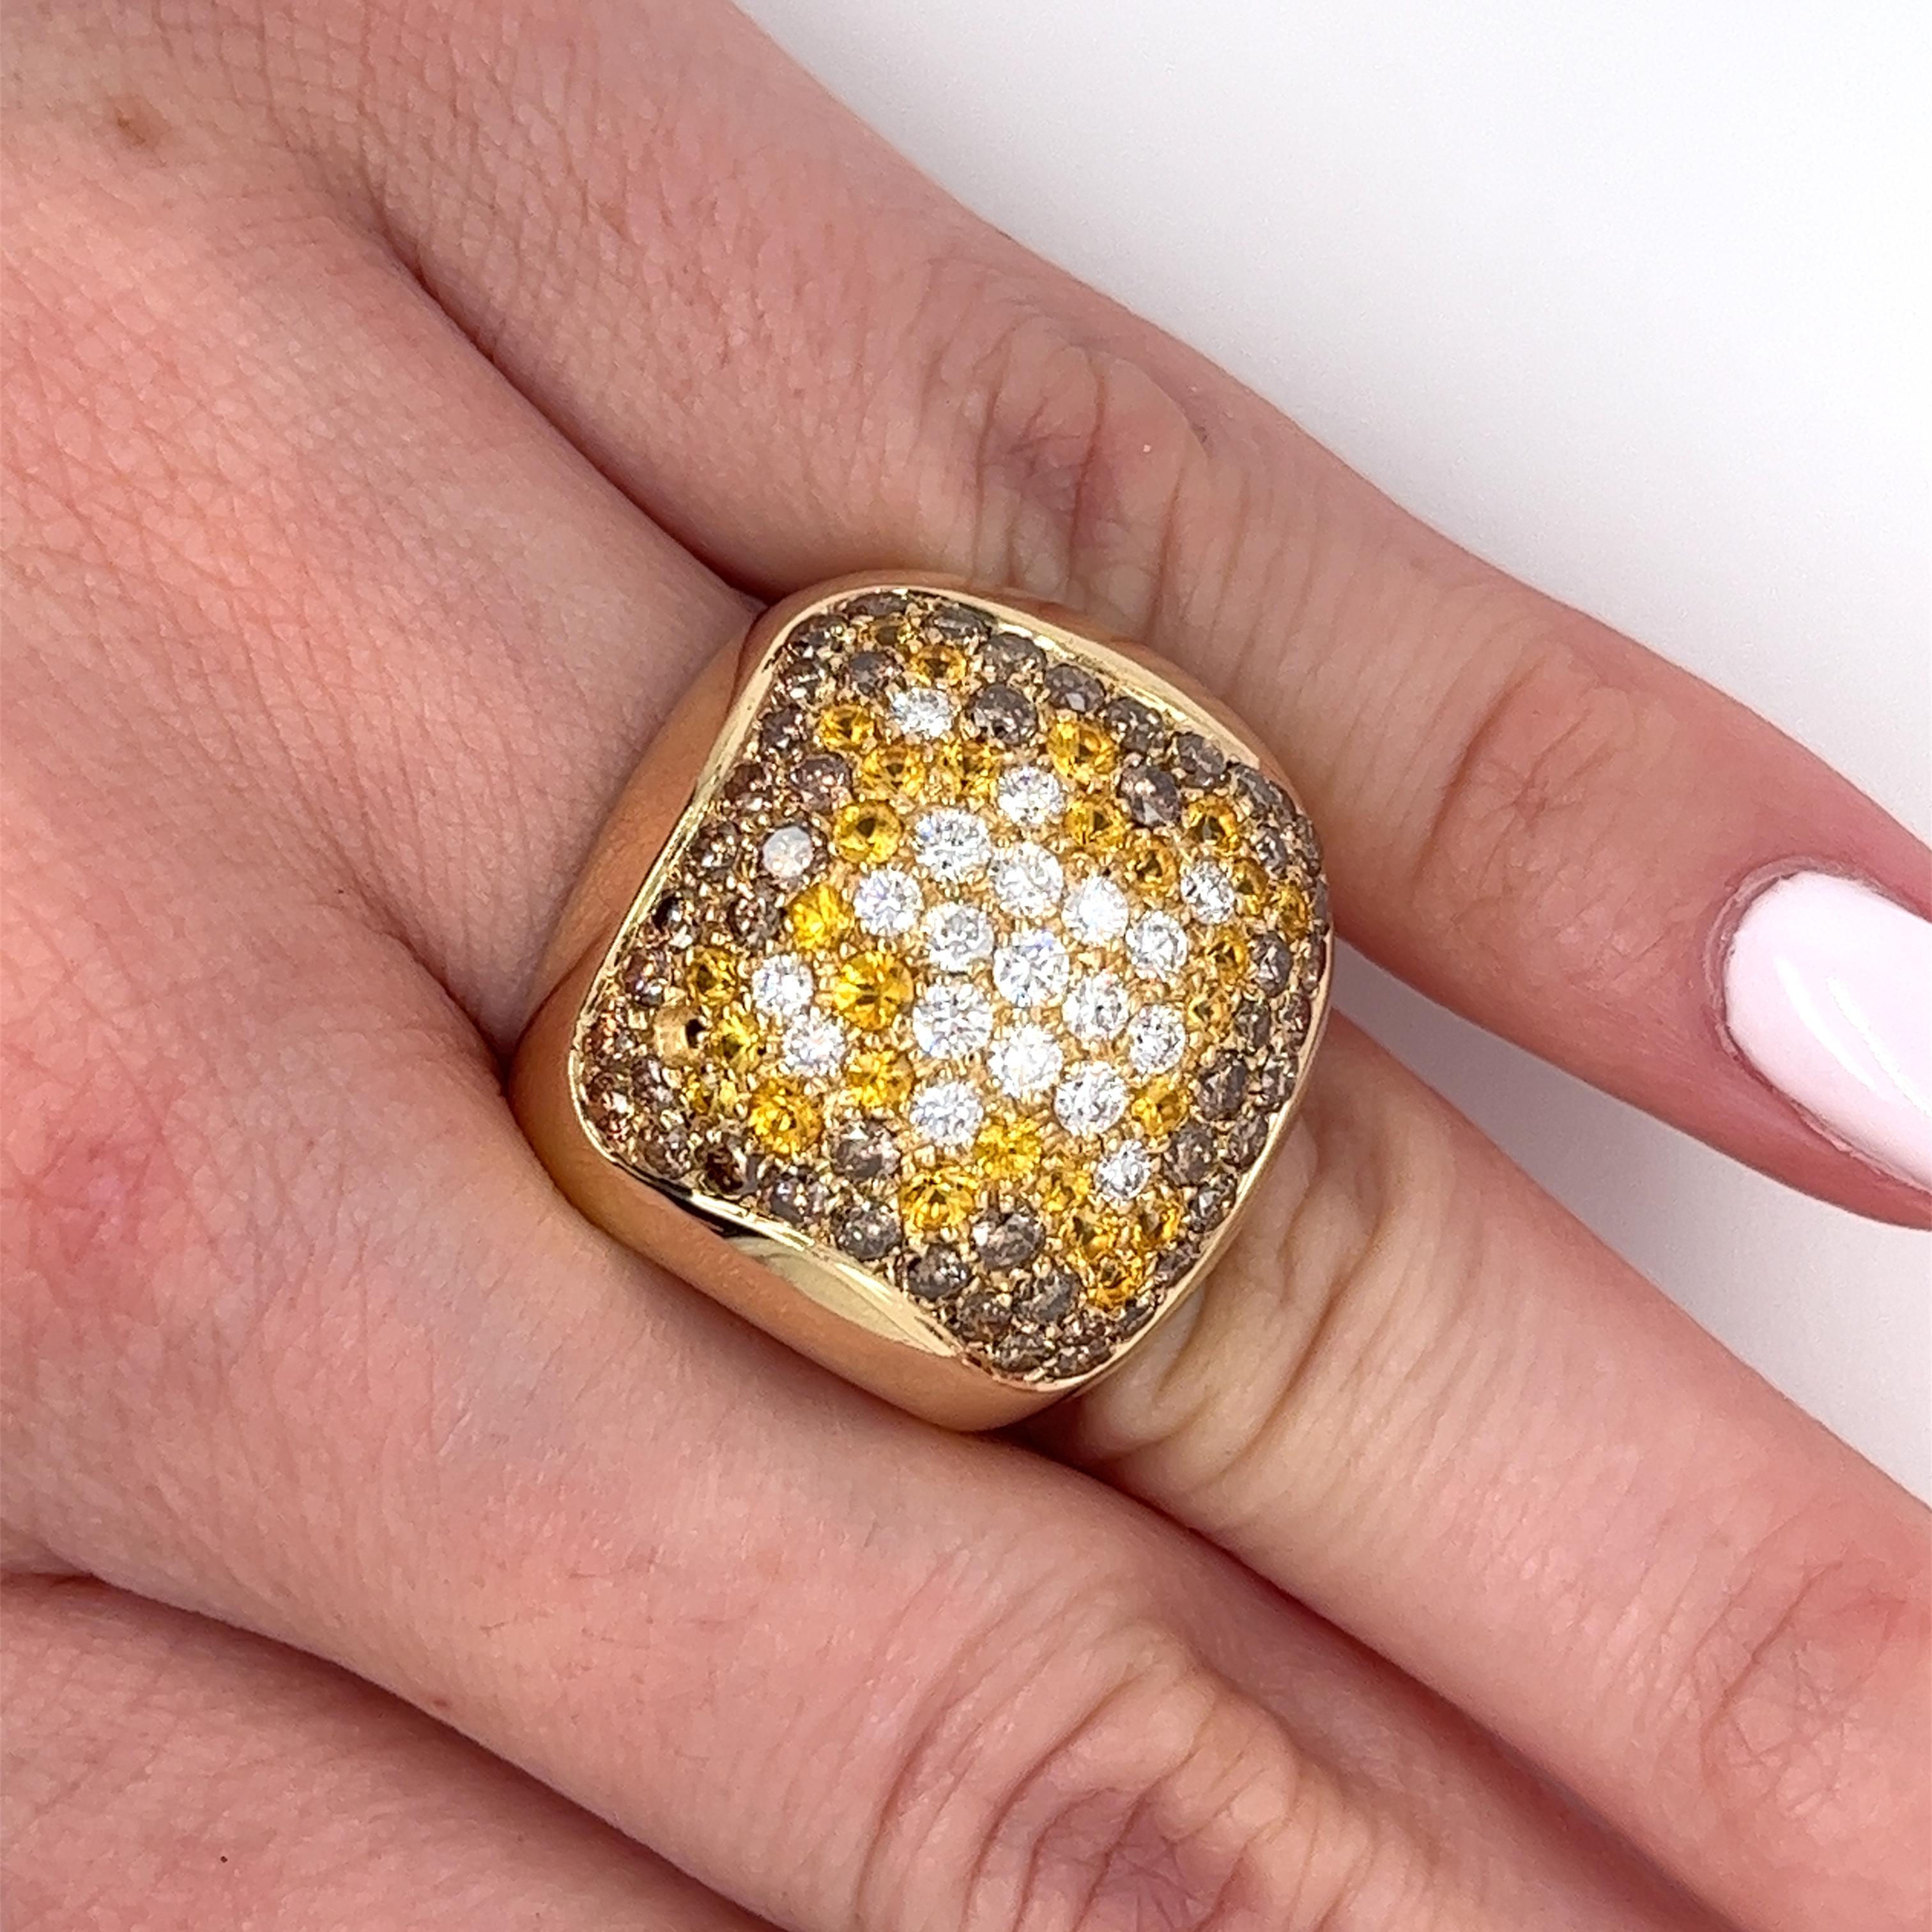 This ring features a cluster of round brilliant cut white and brown diamonds, complemented by yellow sapphires. The dome-shaped design is set in 14k yellow gold with a curved open ring shank. All natural, mined gemstones and set in 14 karat solid